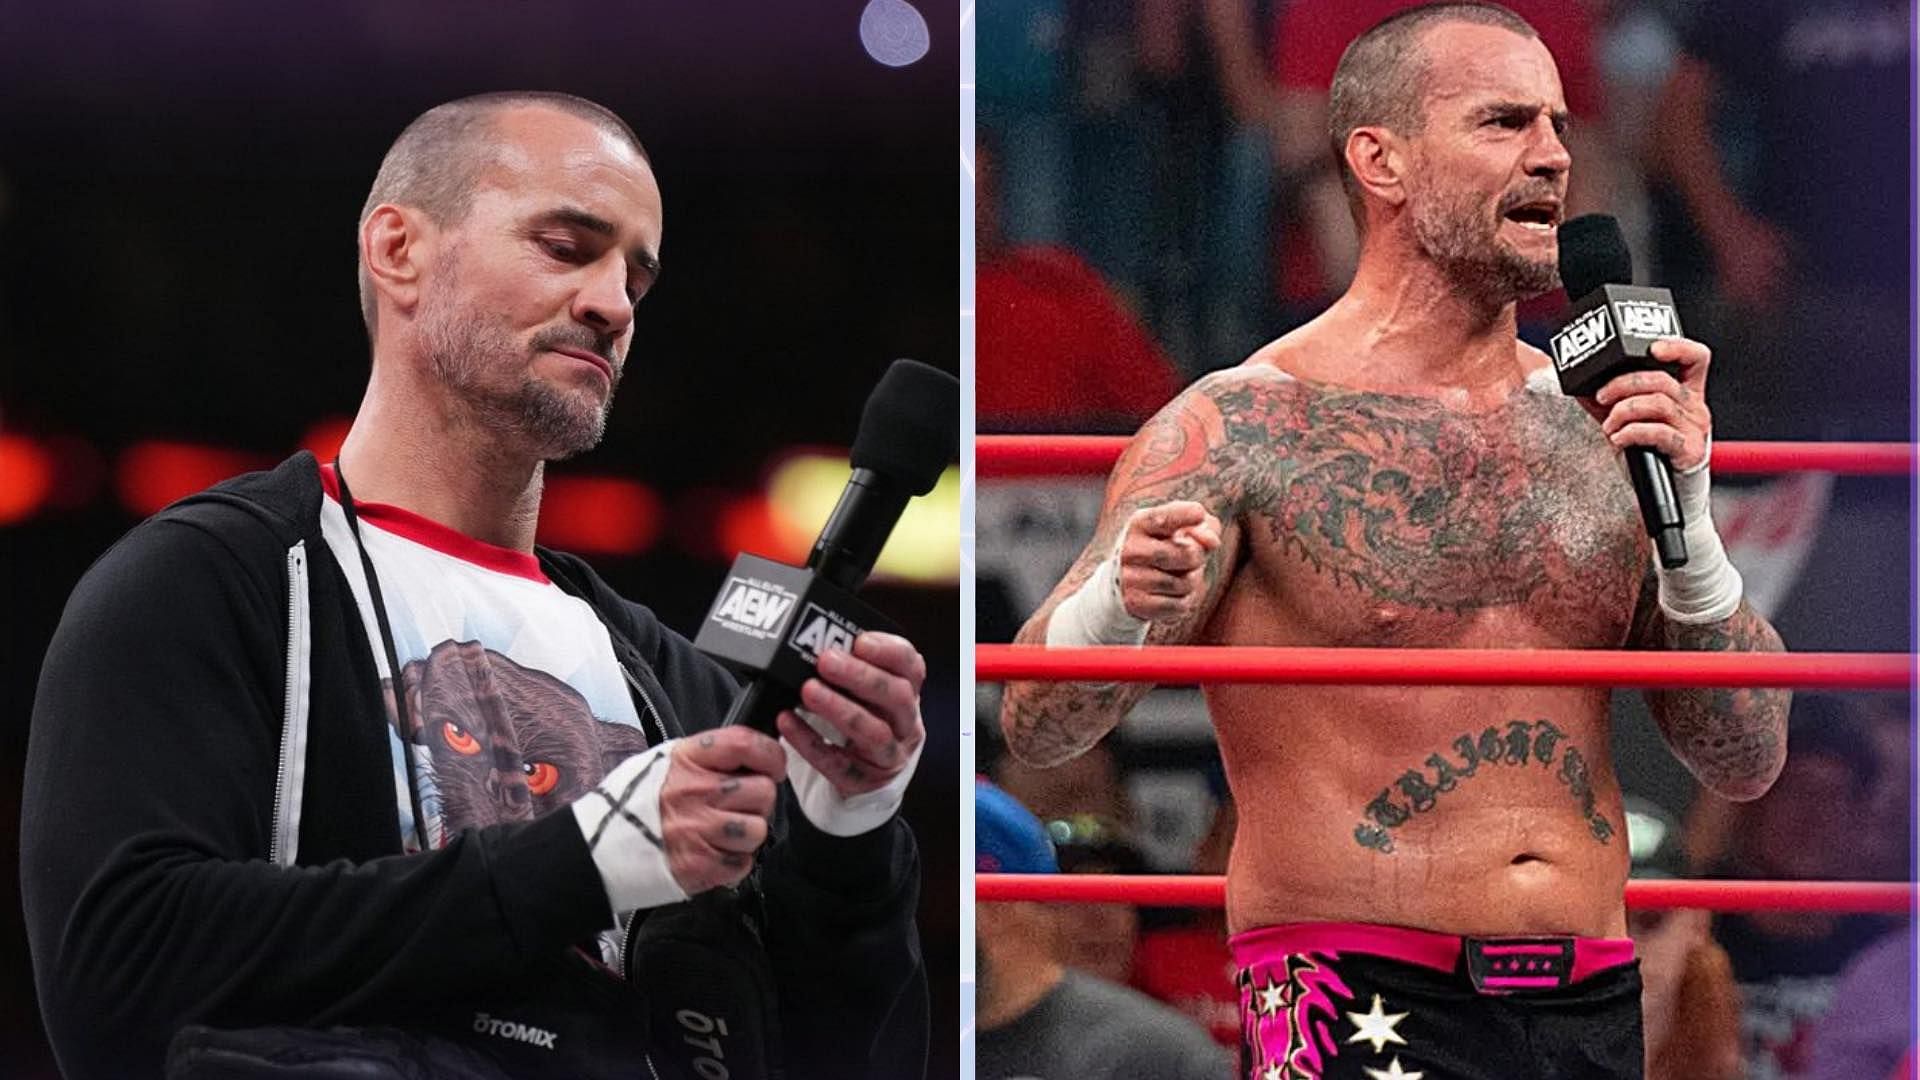 CM Punk could potentially return to WWE and may have a feud already lined up